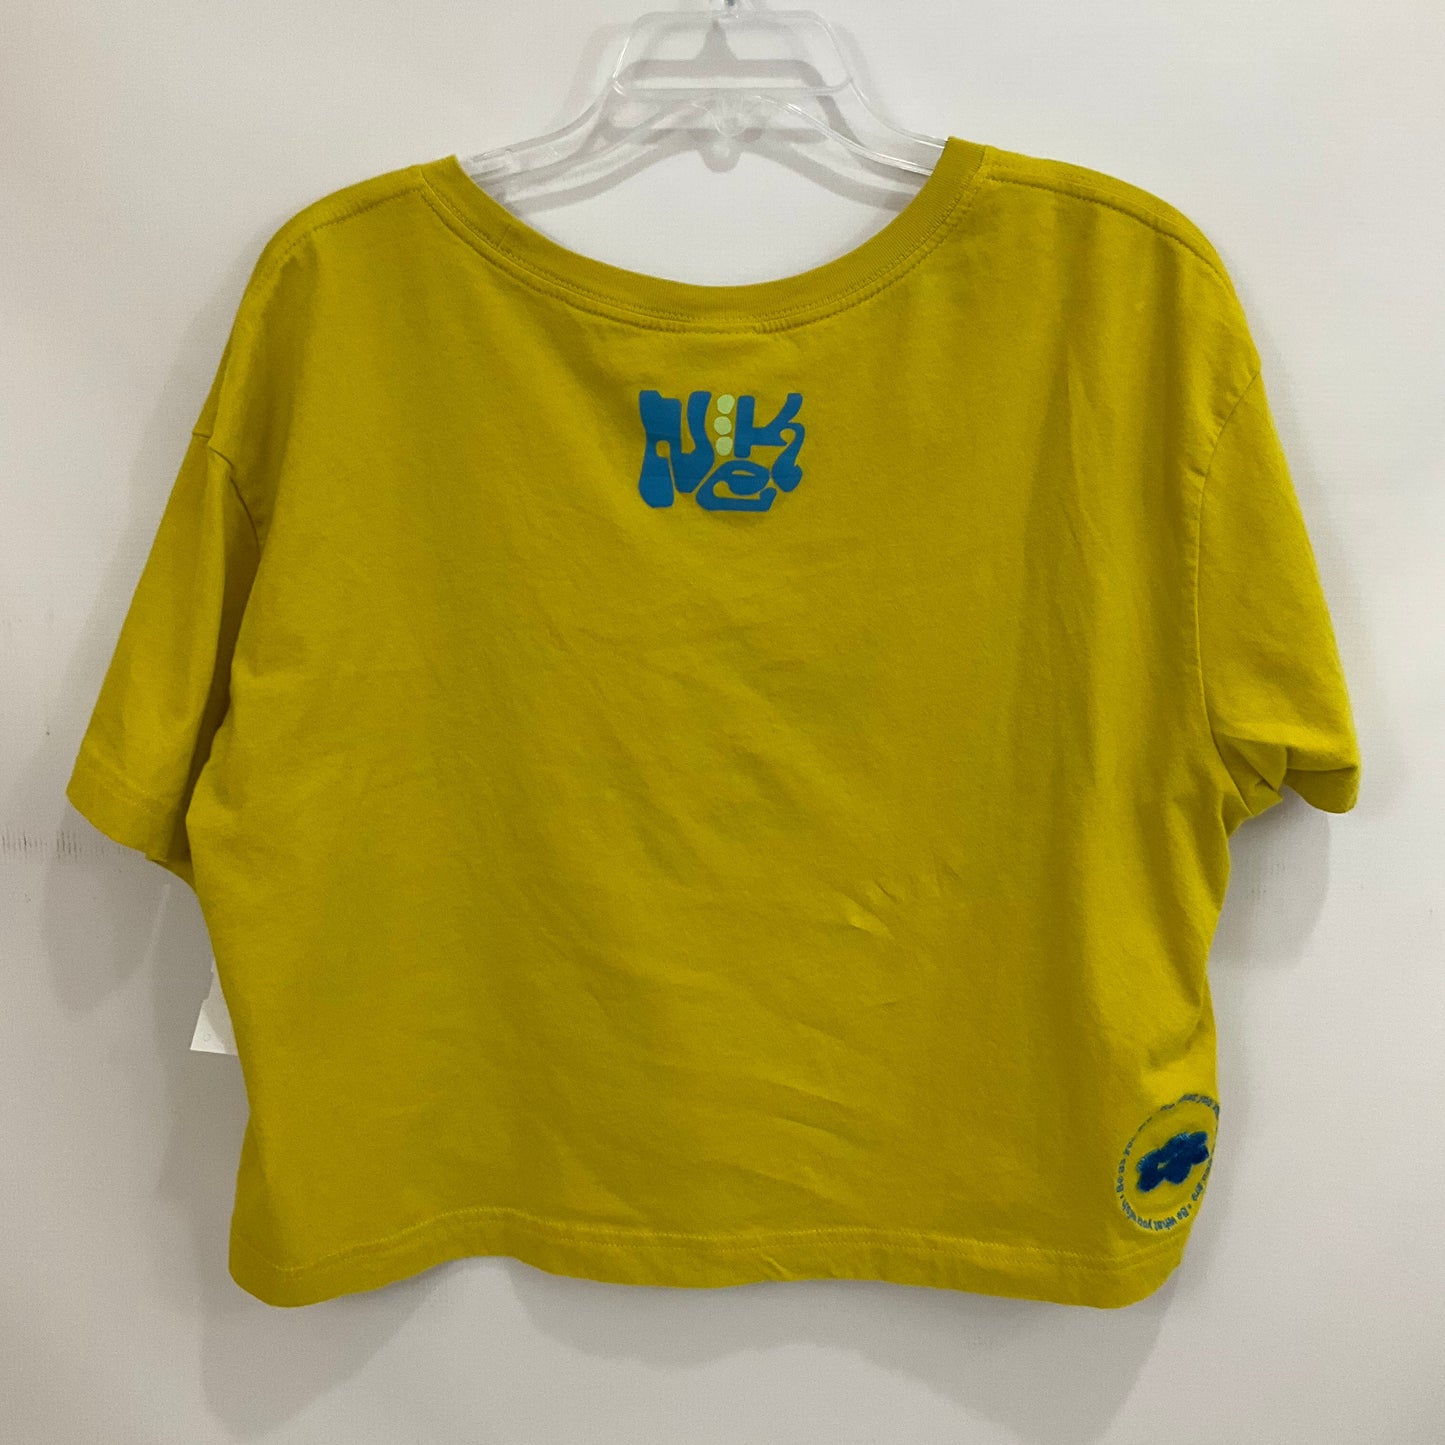 Yellow Athletic Top Short Sleeve Nike Apparel, Size L